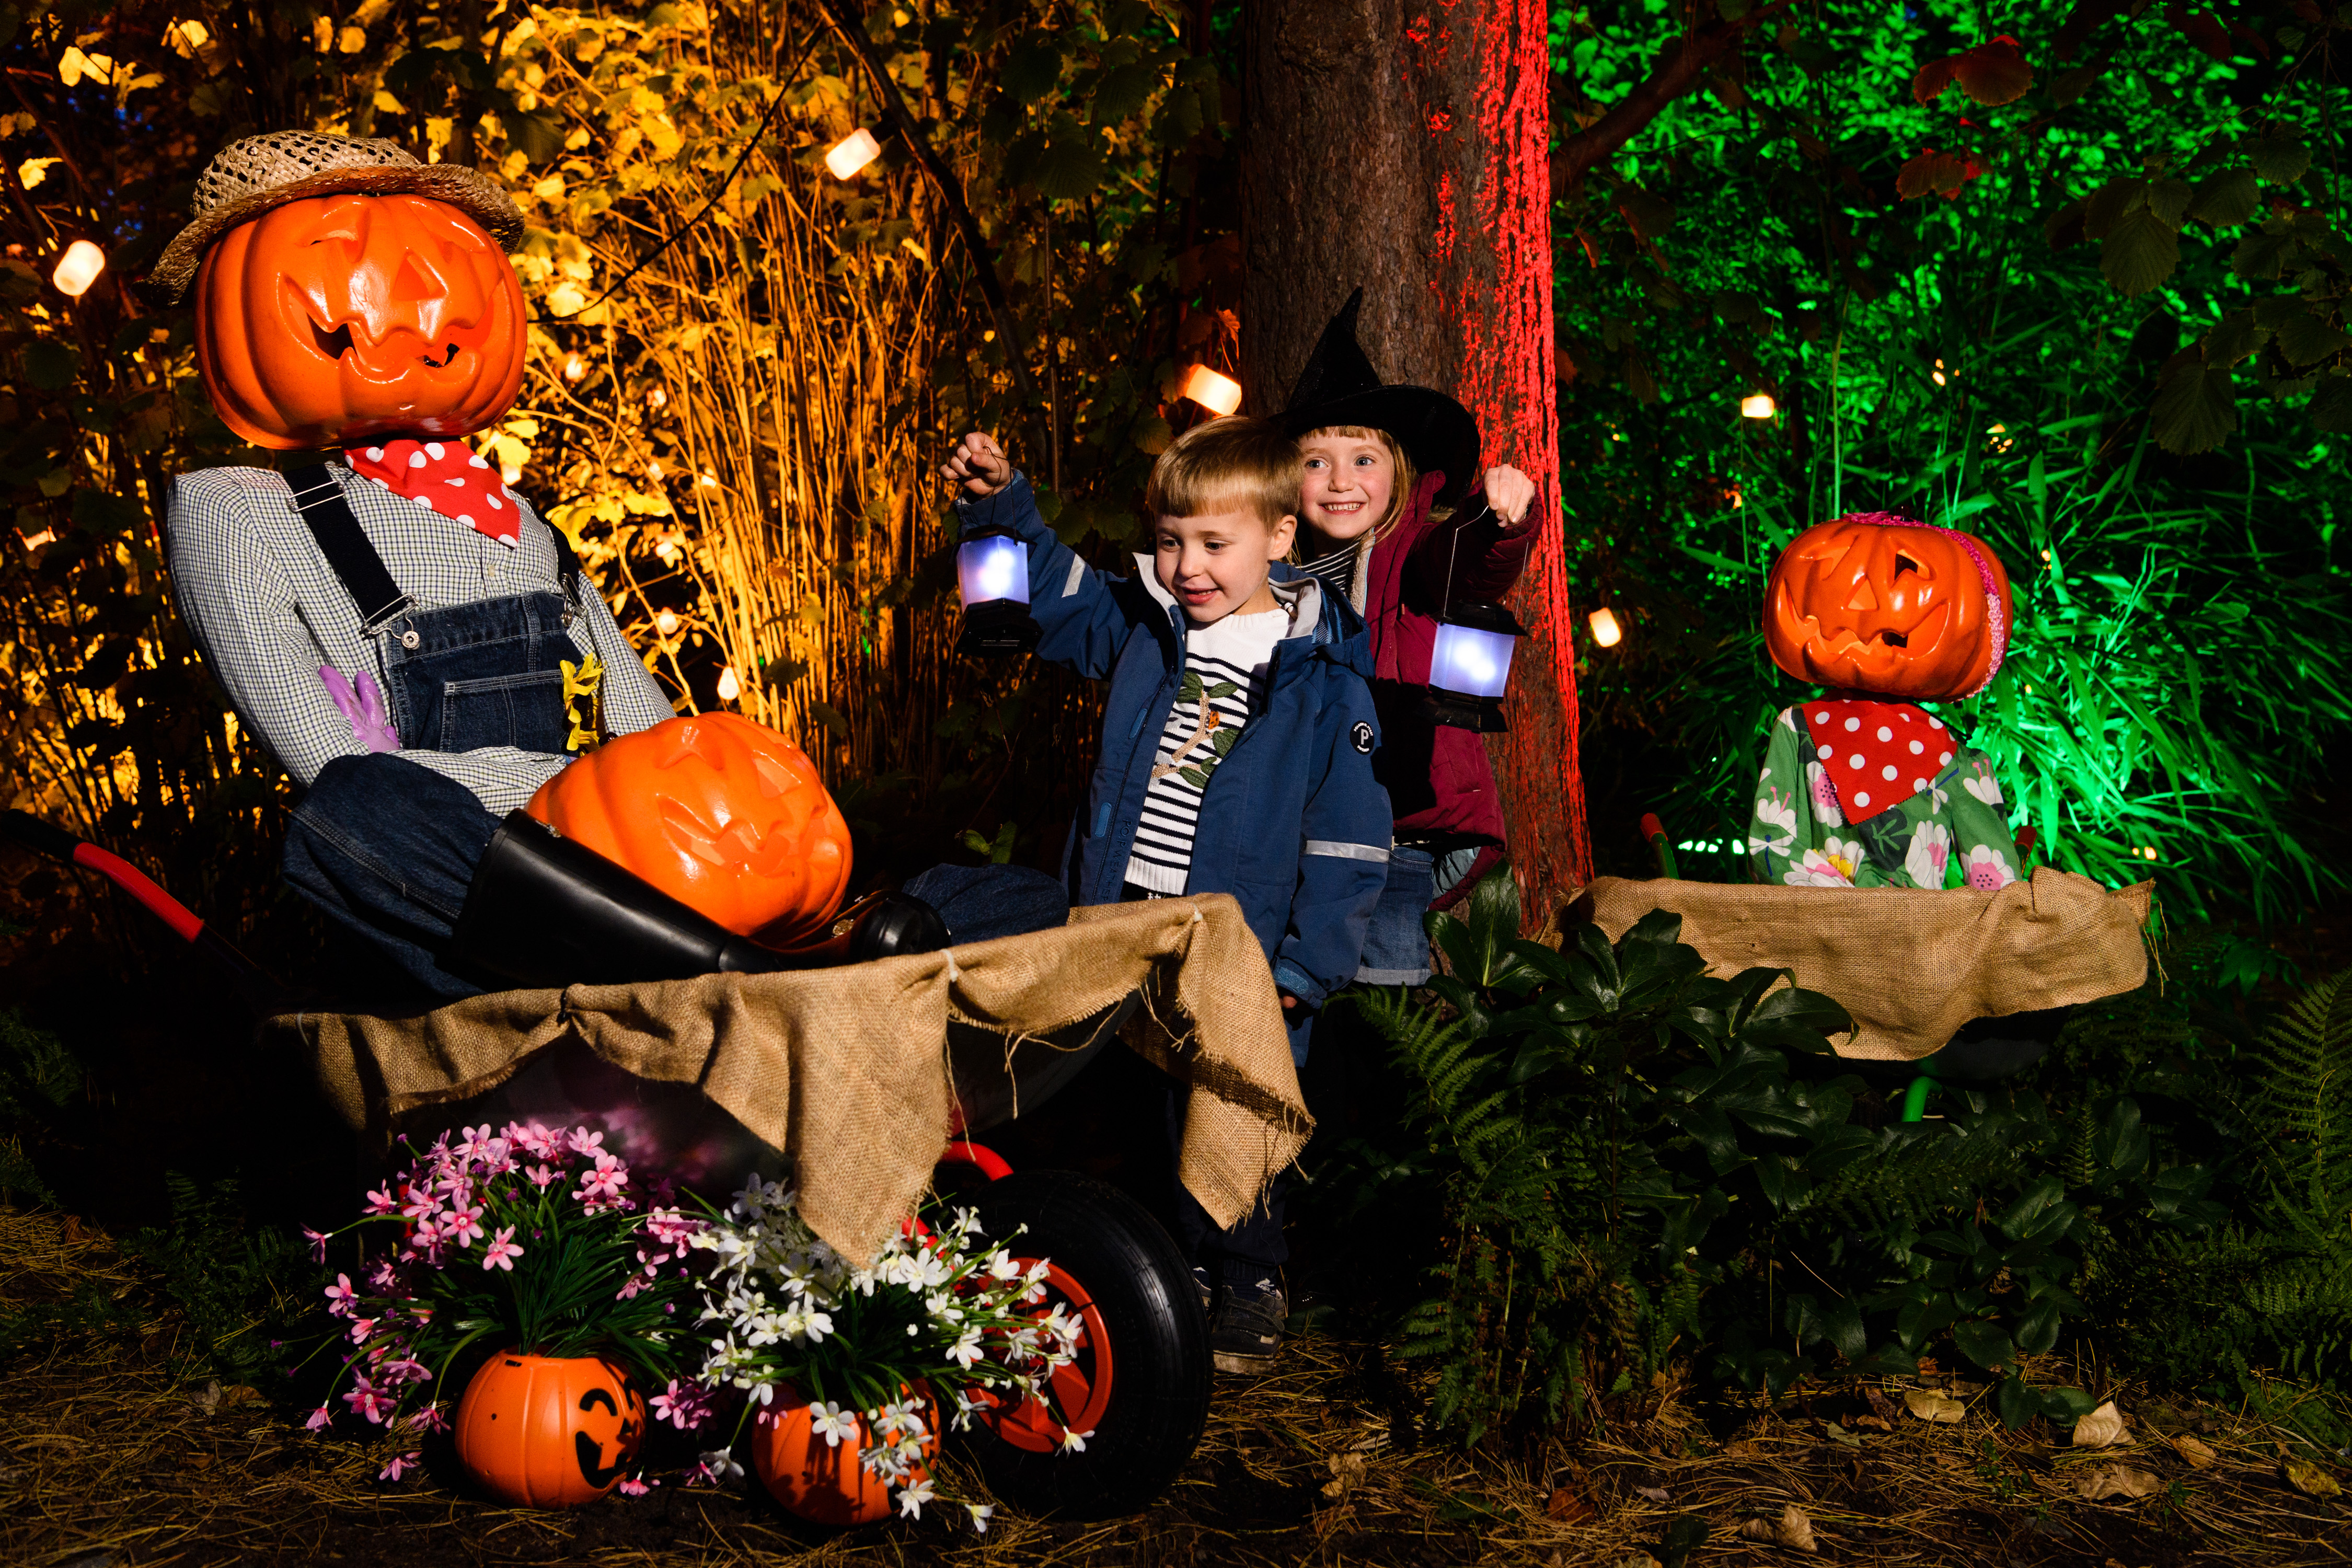 Two children amongst a Halloween themed display with pumpkins and scarecrows

IMAGES: 2021